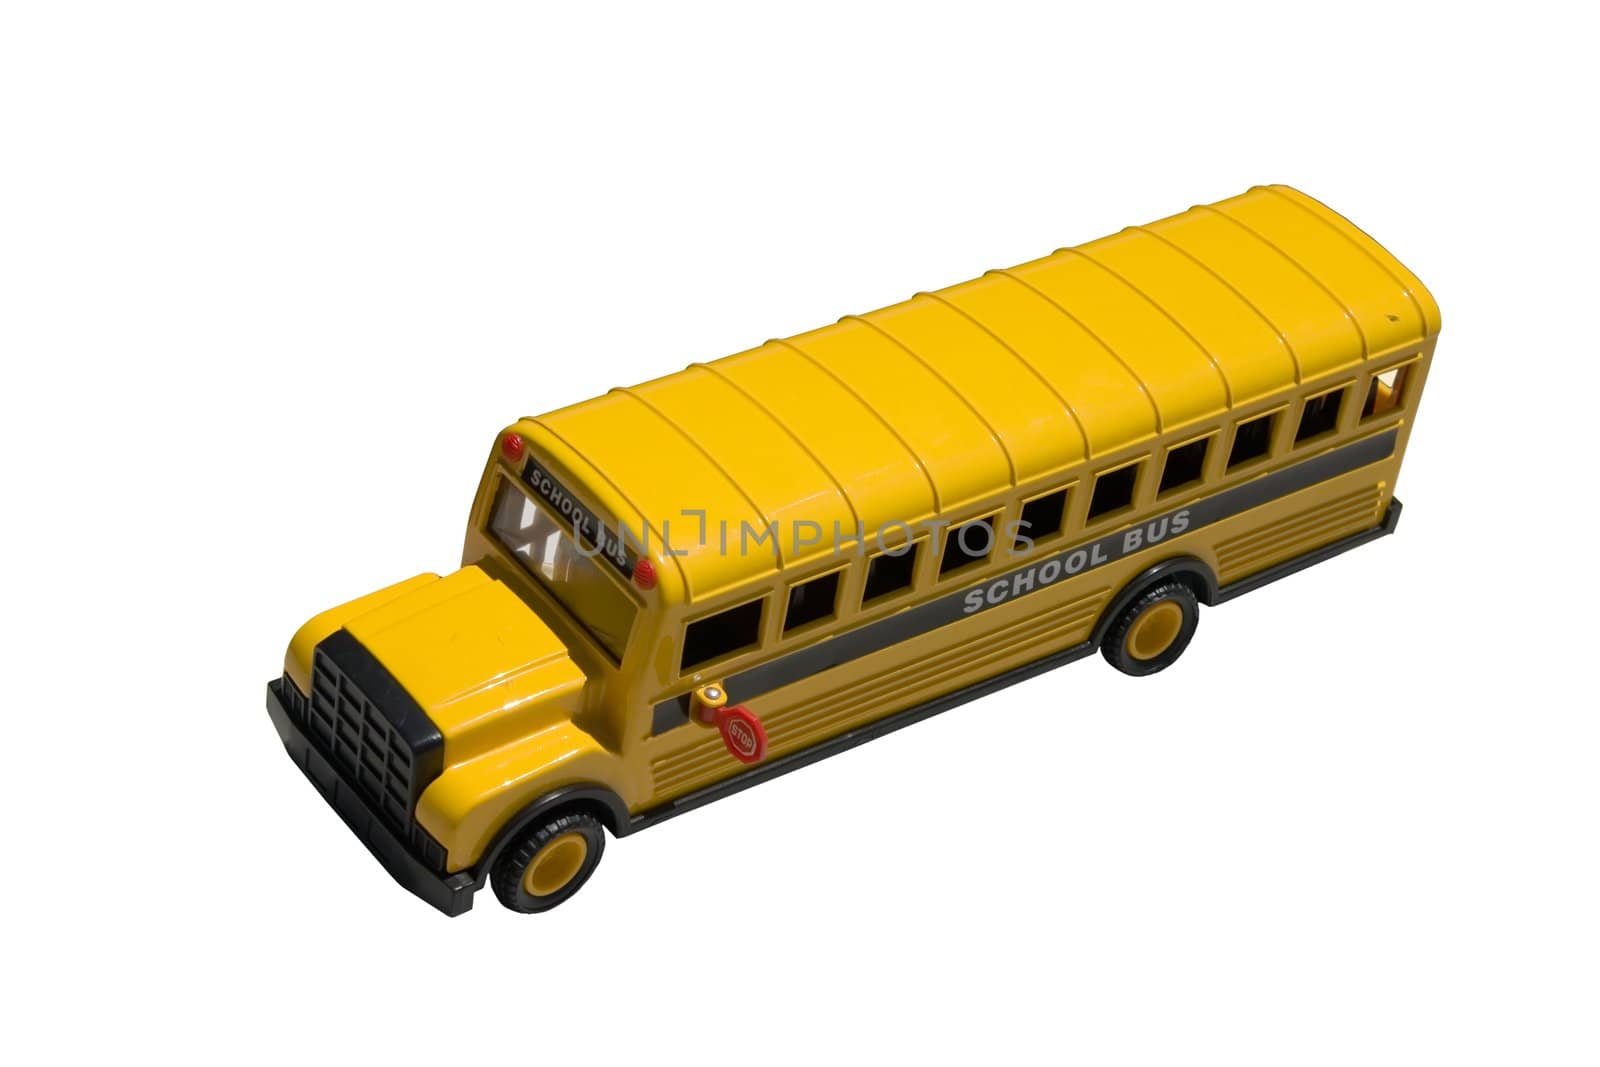 Toy School Bus Top by dtouch1